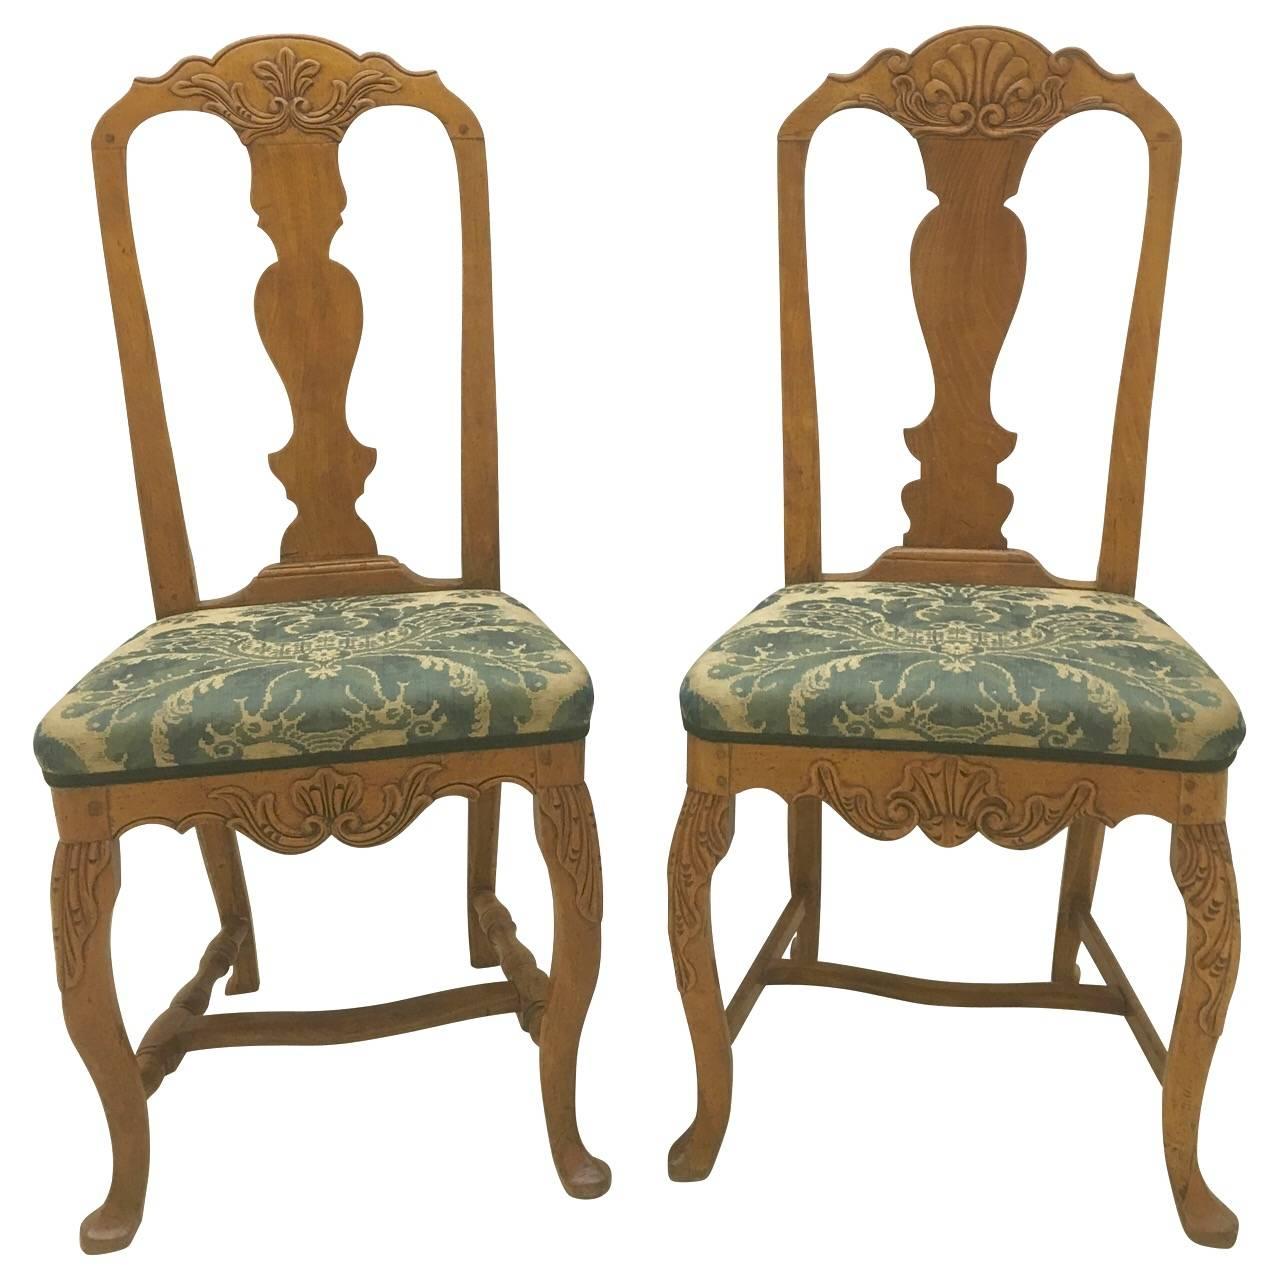 Pair of Danish Rococo Dining Room Chairs